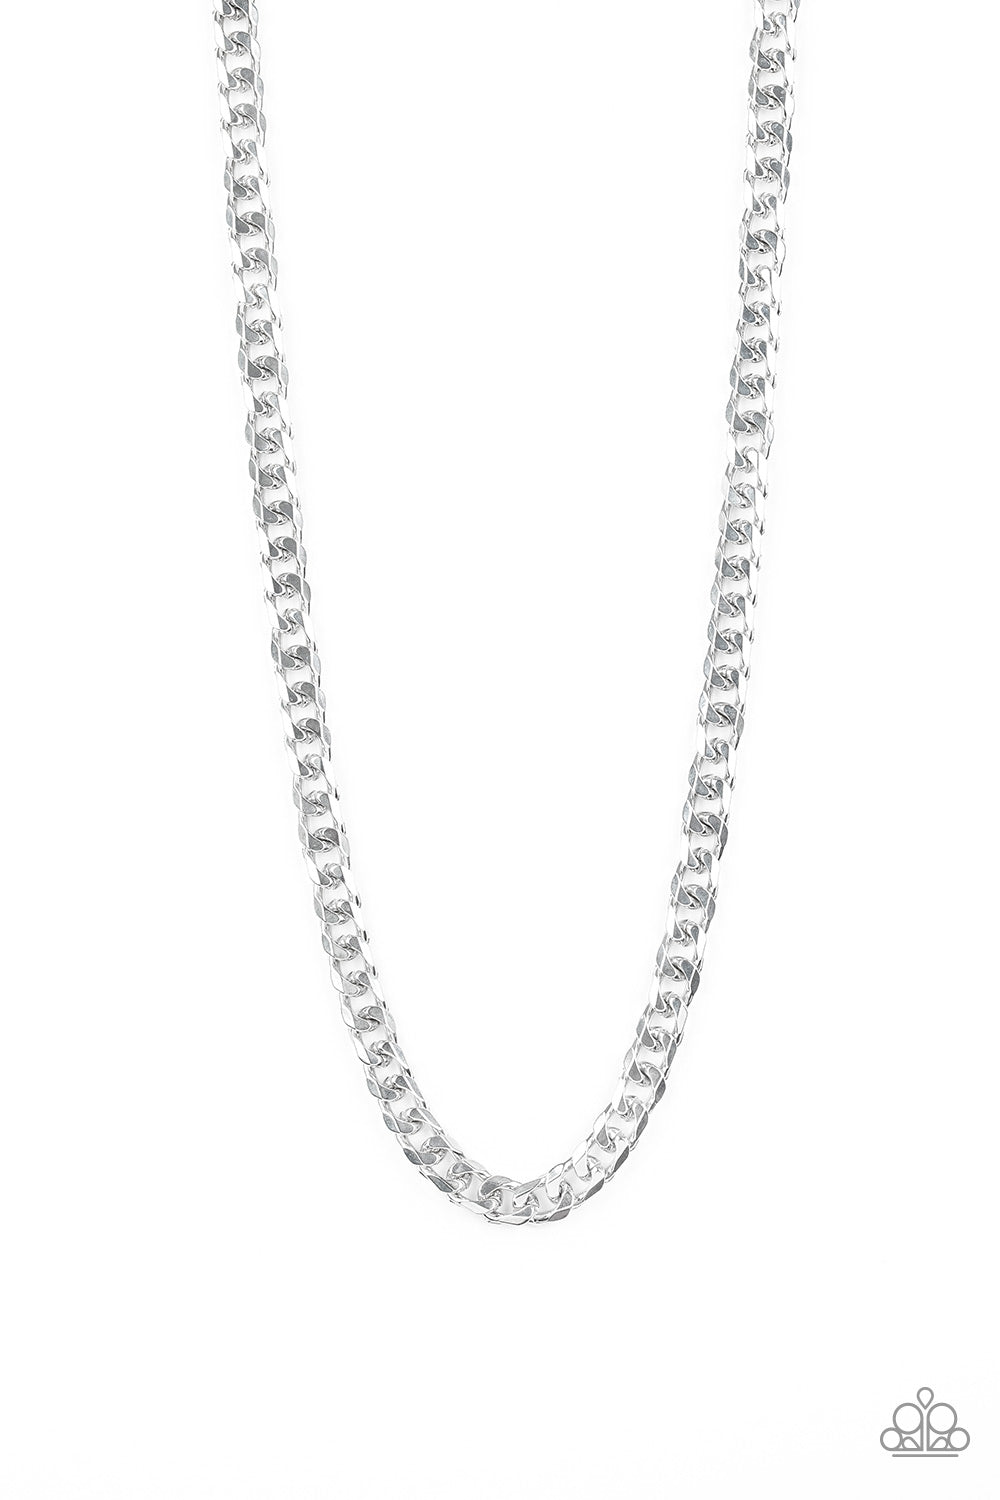 The Game CHAIN-ger Silver Urban Necklace - Paparazzi Accessories - jazzy-jewels-gems